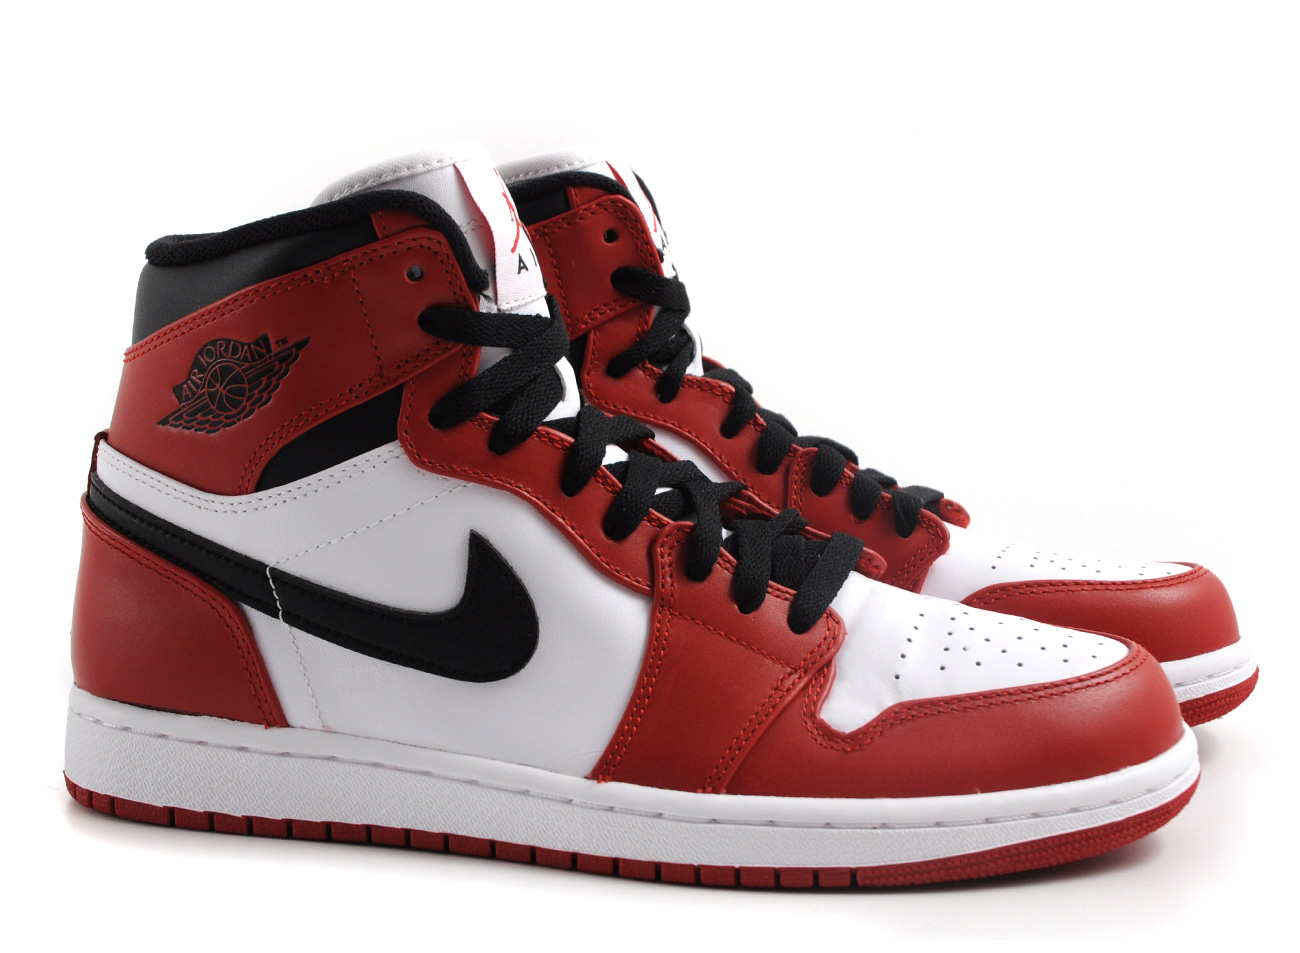 Nike air jordan 1 – shoes are coming in timeless colors! – fashionarrow.com